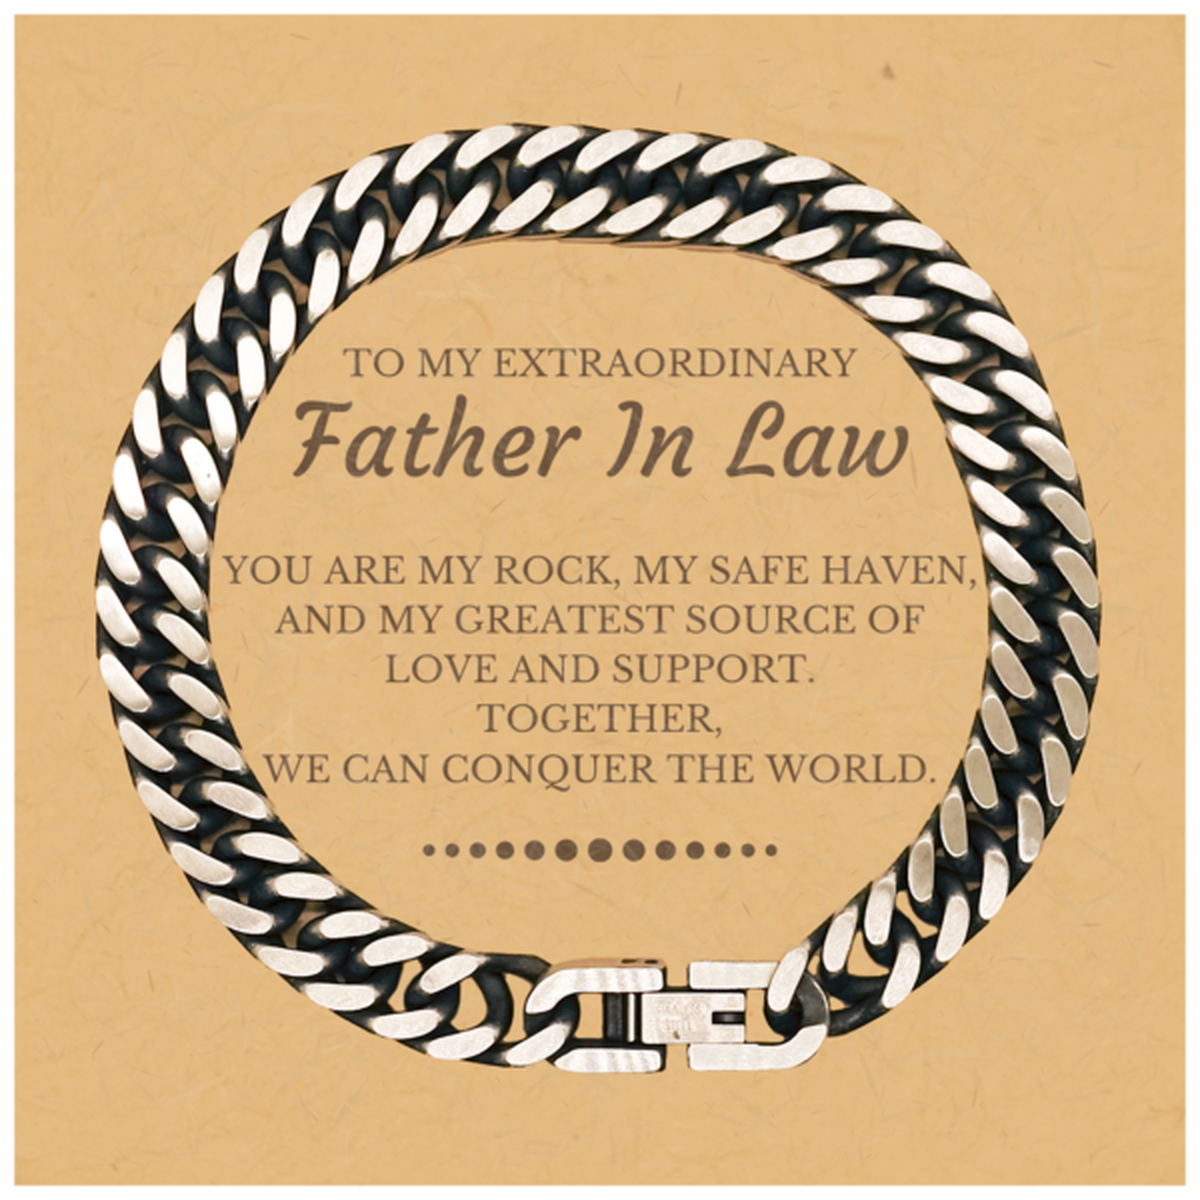 To My Extraordinary Father In Law Gifts, Together, we can conquer the world, Birthday Christmas Cuban Link Chain Bracelet For Father In Law, Christmas Gifts For Father In Law